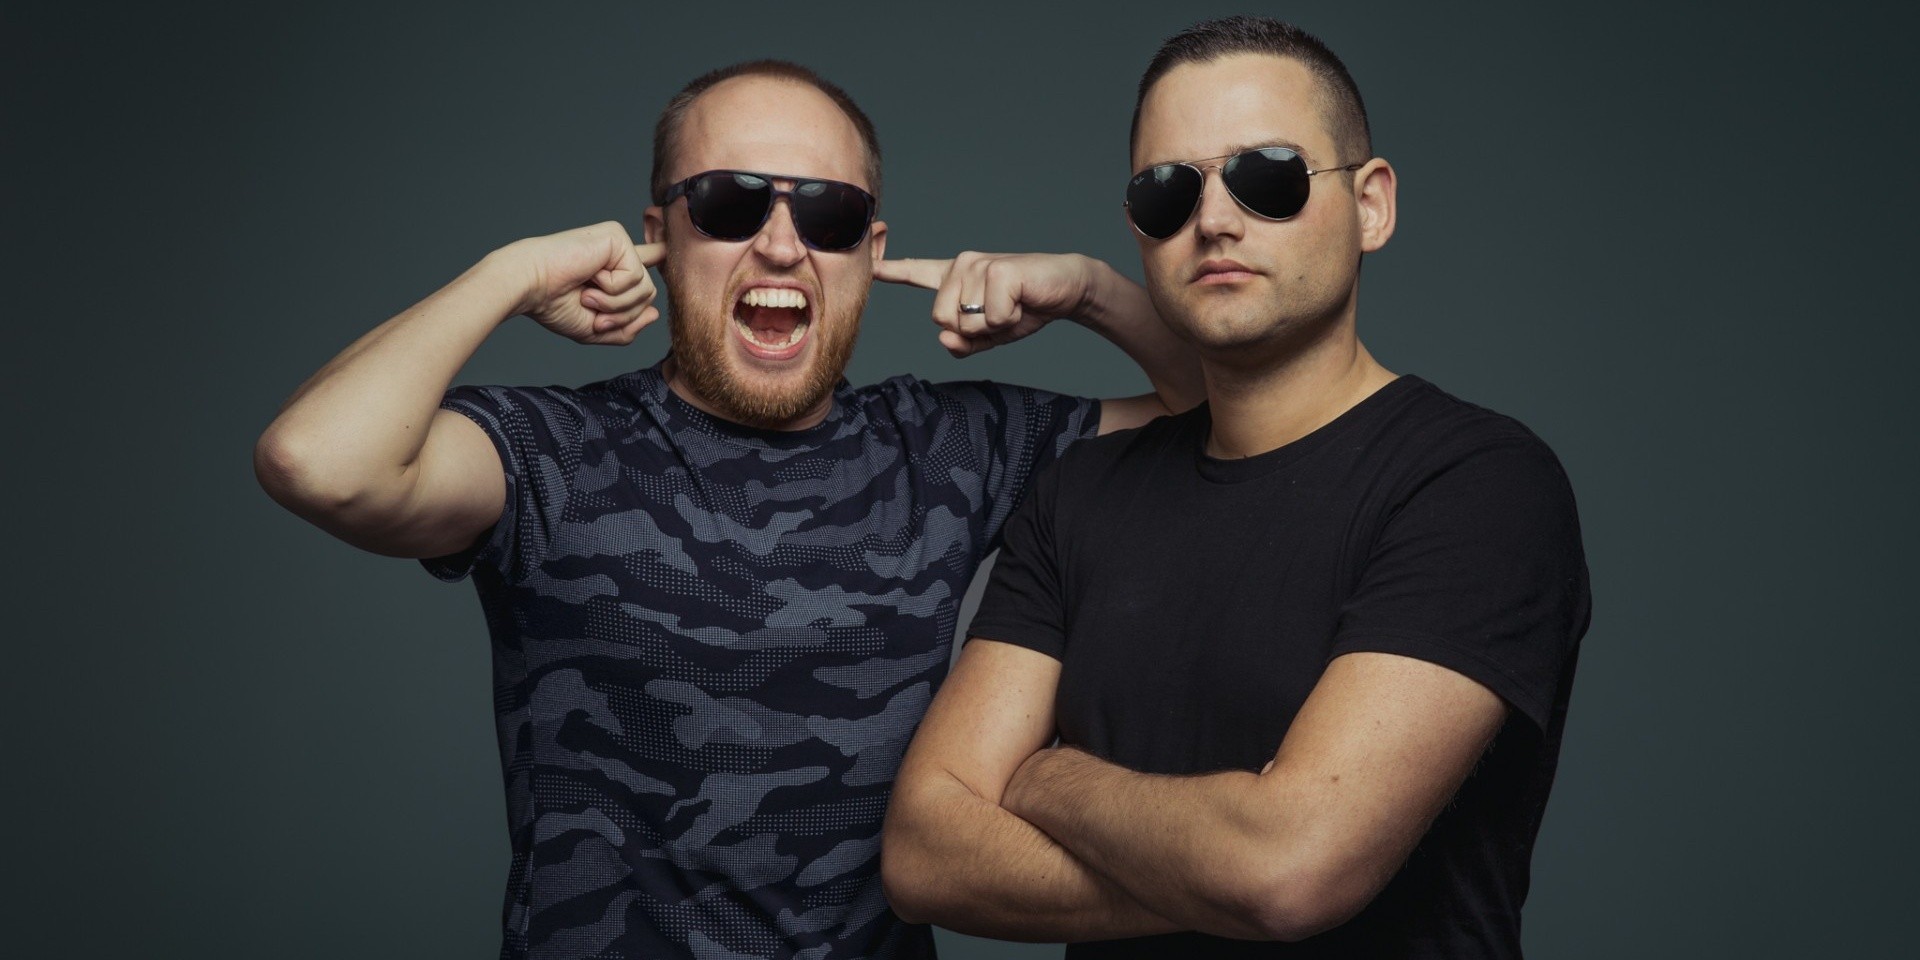 Legacy Festival reveals first act in second wave line-up – Norwegian hardstyle duo Da Tweekaz to perform